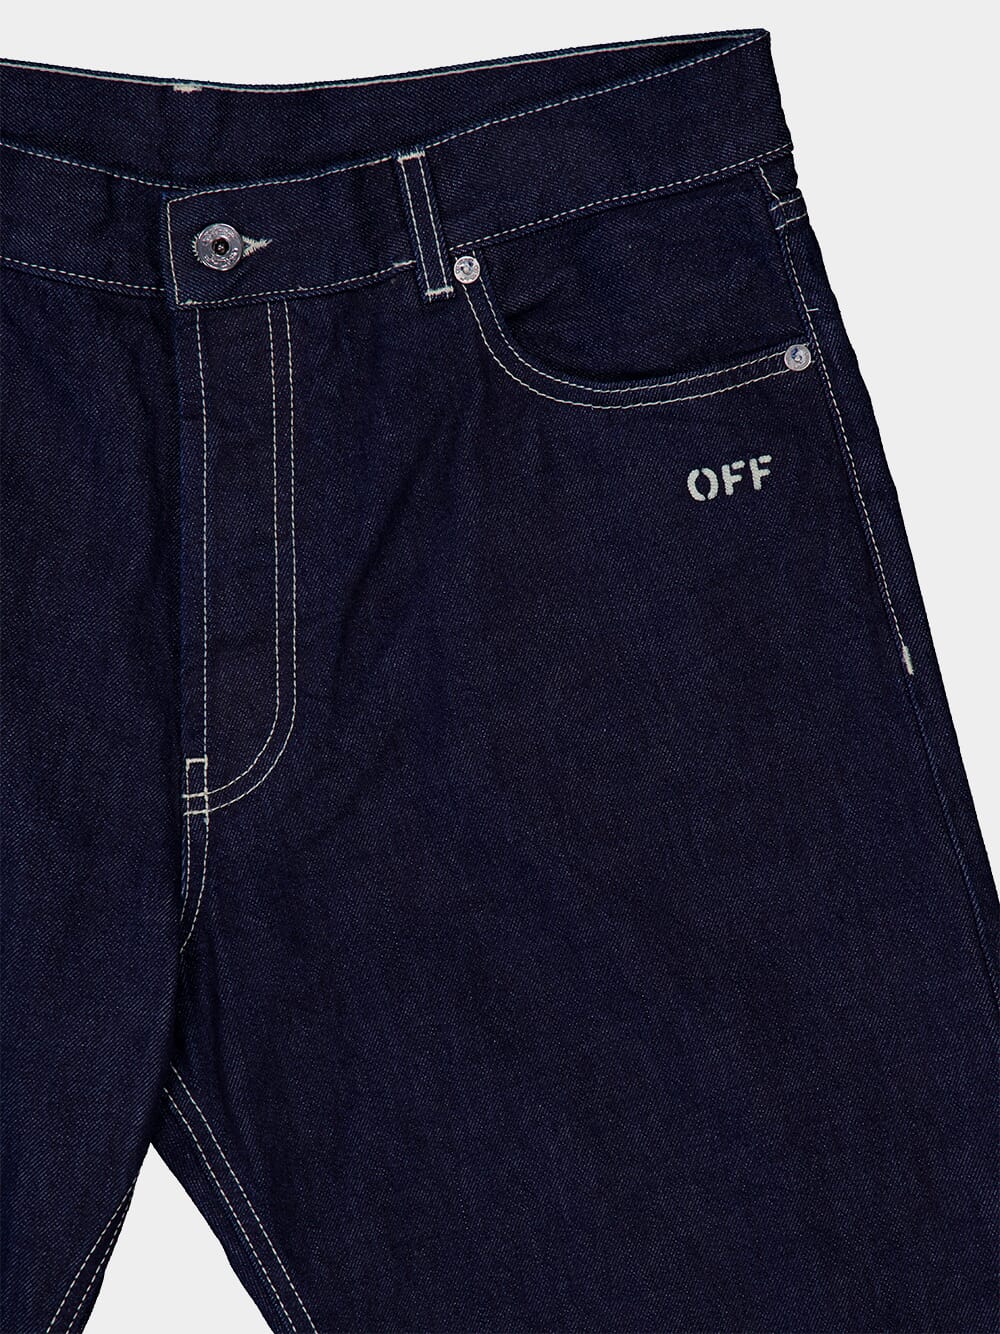 Off-WhiteEmbroidered-Logo Jeans at Fashion Clinic